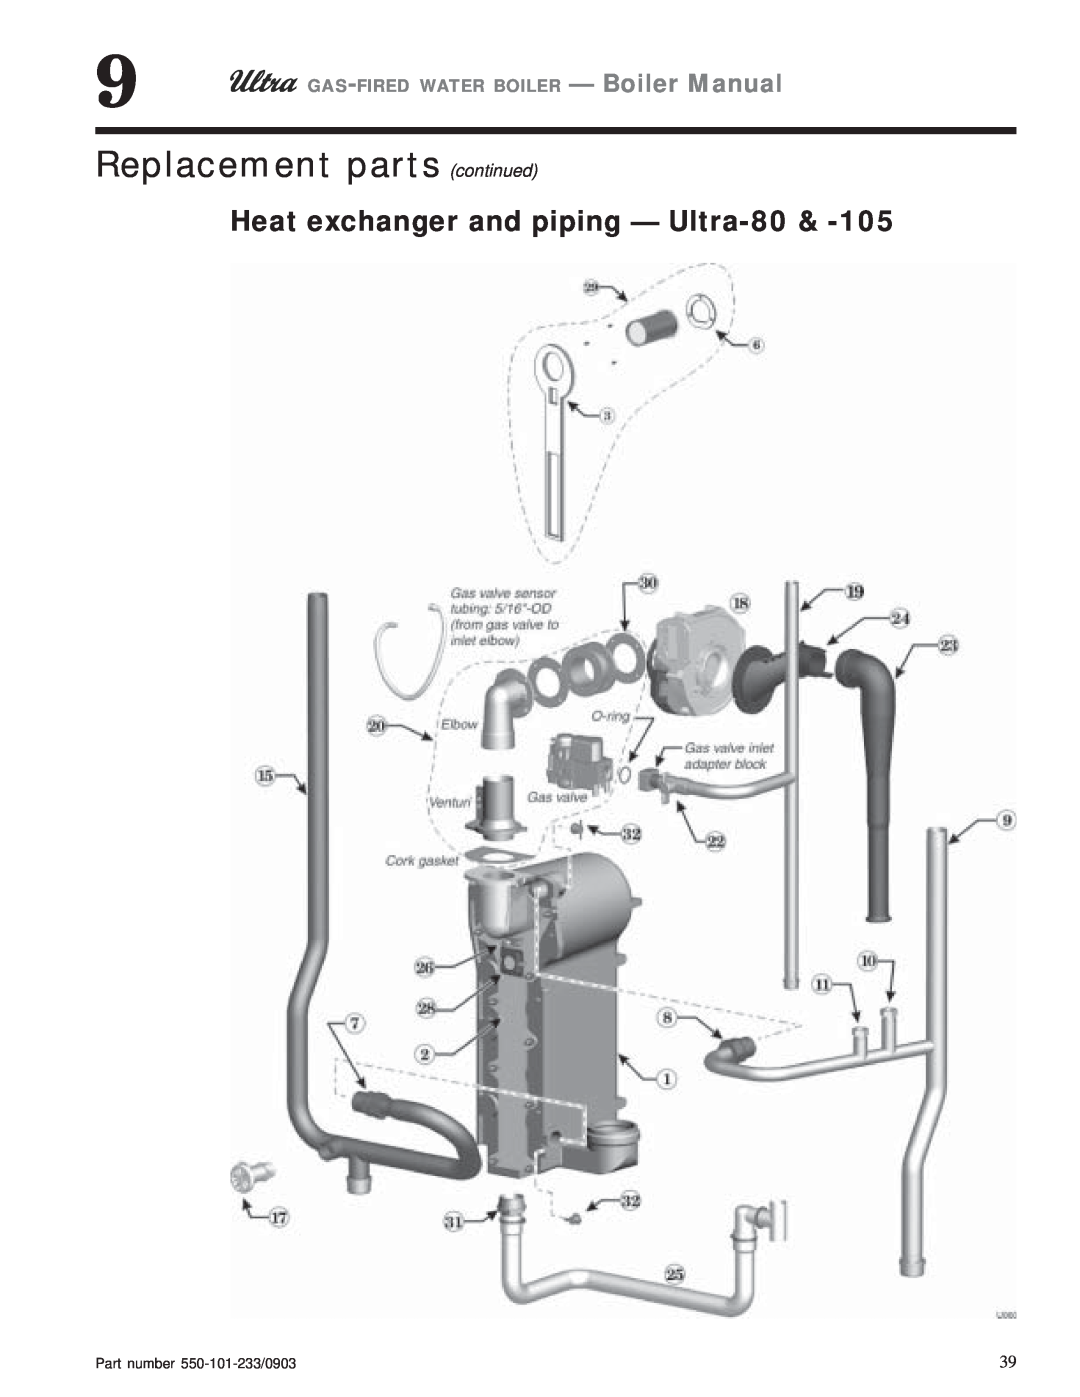 Weil-McLain 155 Replacement parts continued, Heat exchanger and piping - Ultra-80, GAS-FIRED WATER BOILER - Boiler Manual 